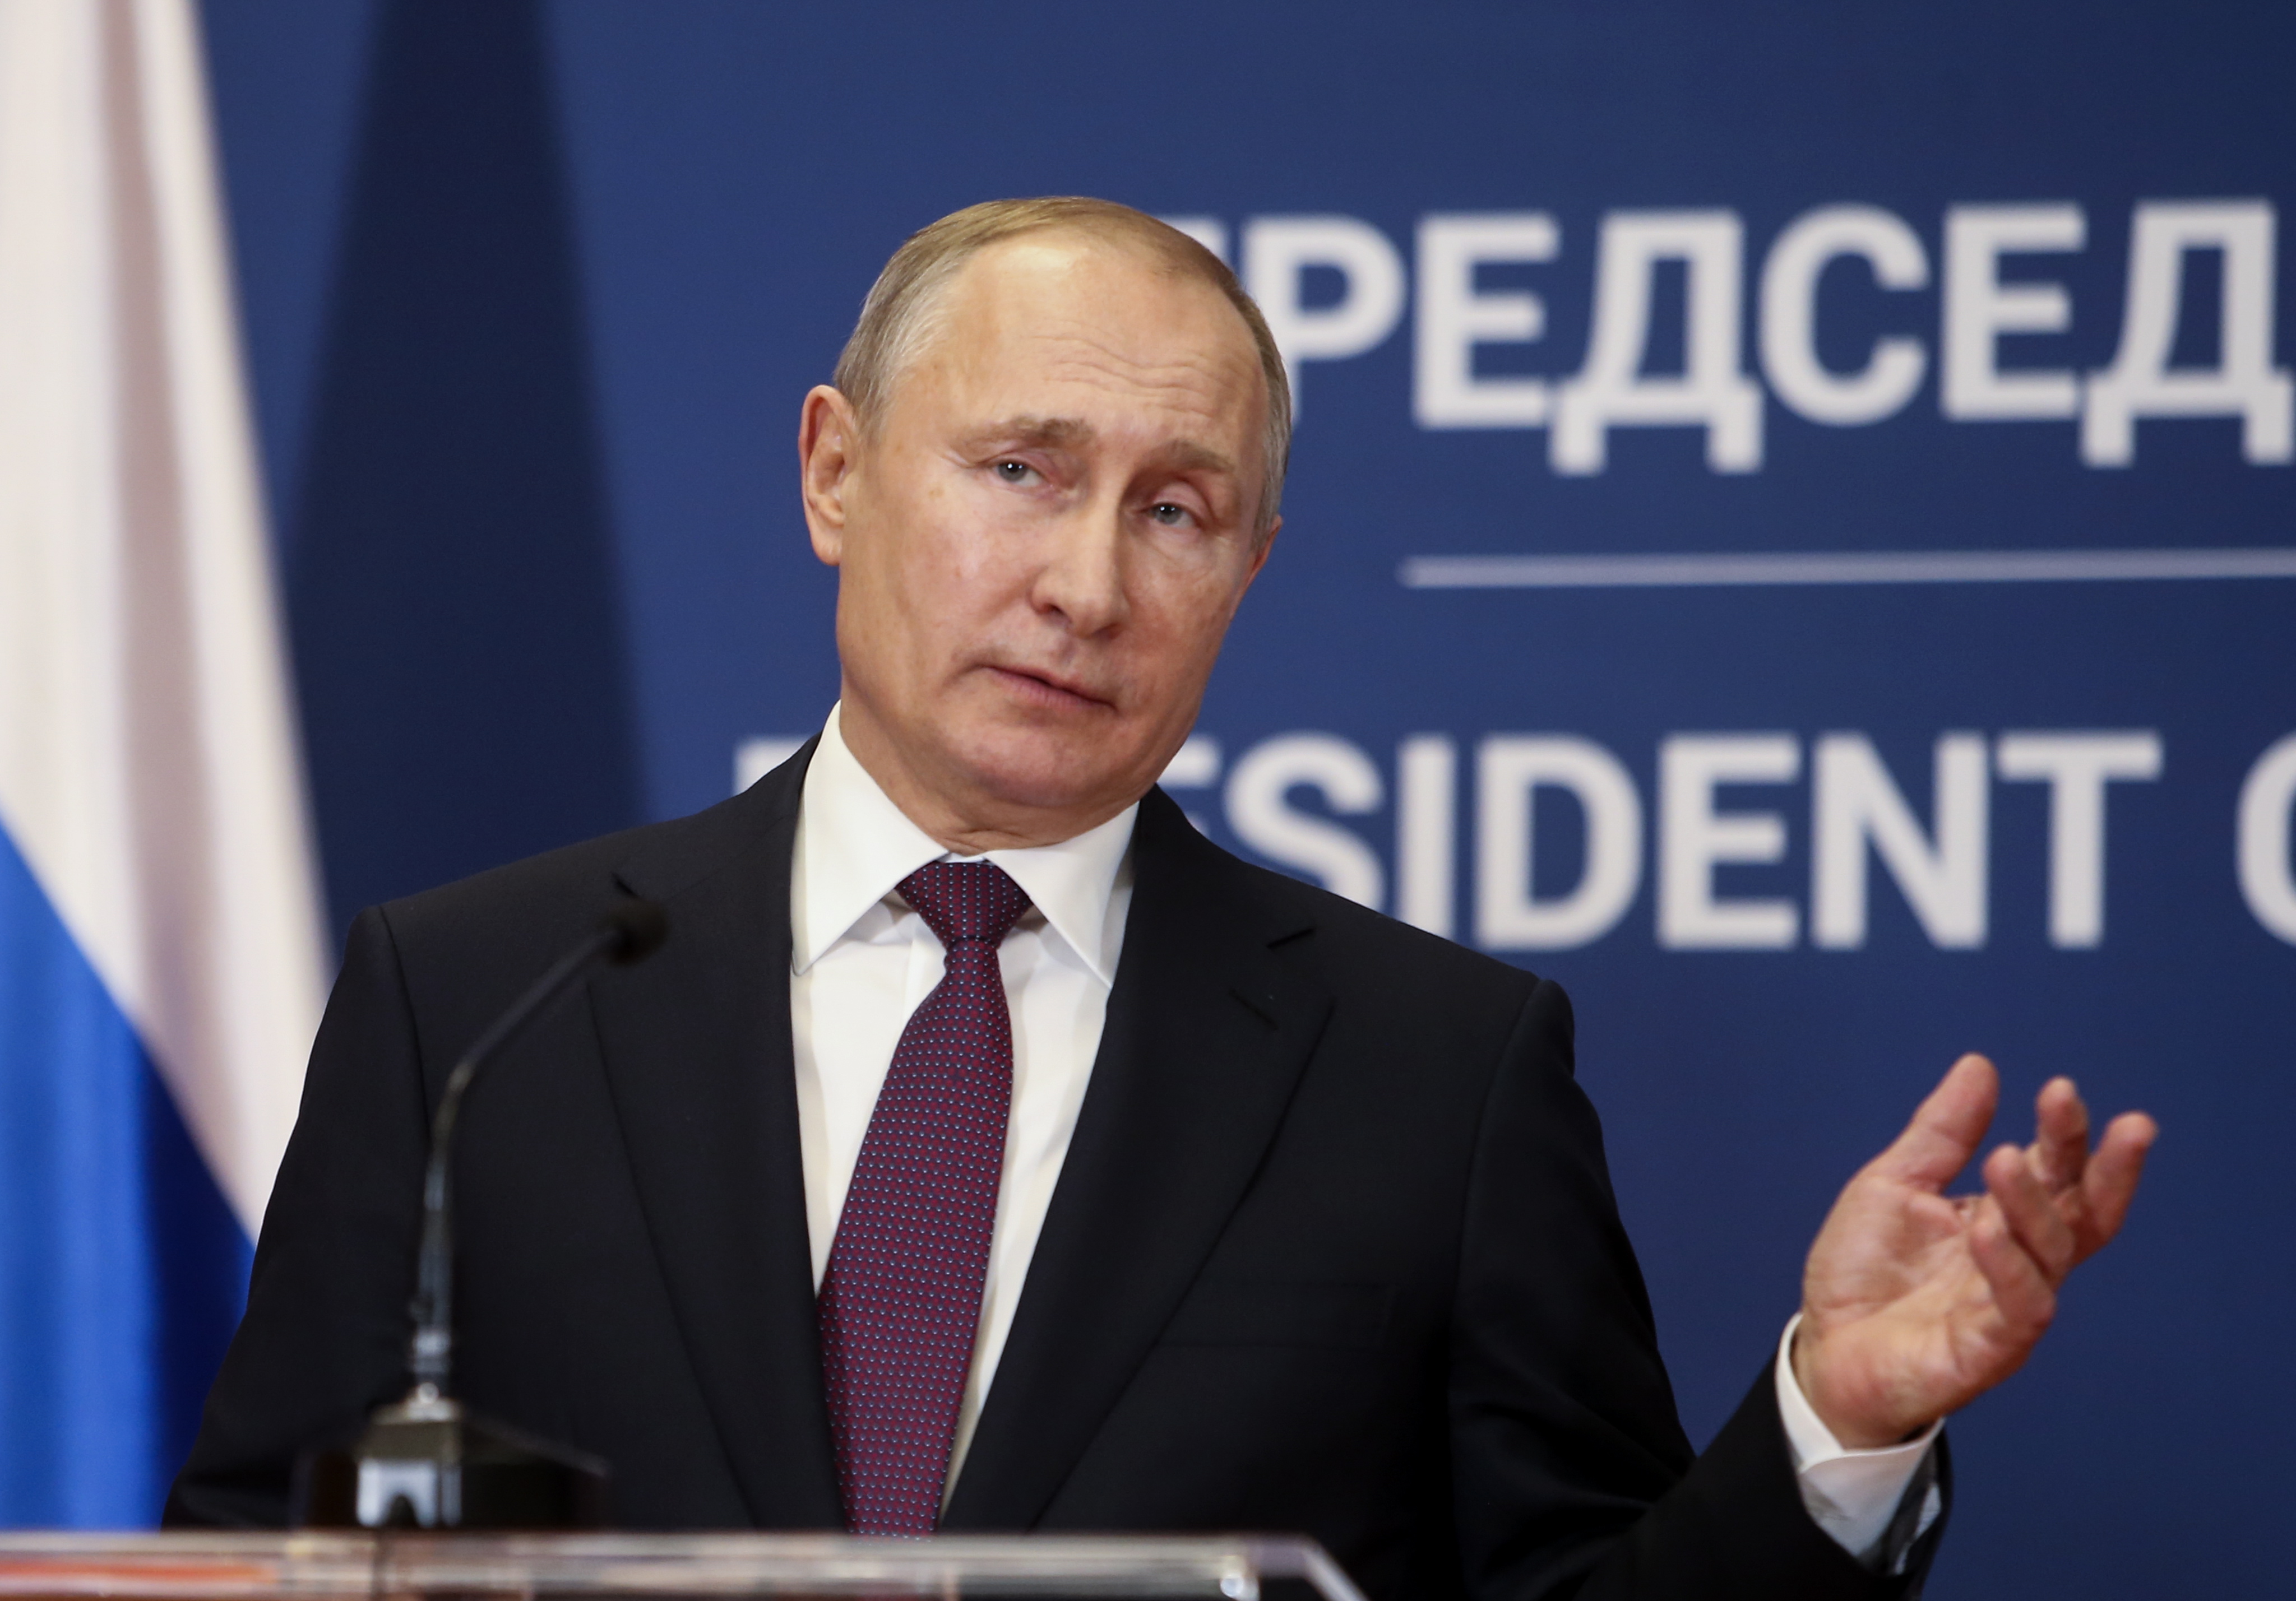 epa07293915 Russian President Vladimir Putin gestures during the joint press conference with his Serbian counterpart  Aleksandar Vucic, in Belgrade, Serbia, 17 January 2019. President Putin is on a one-day state visit to Serbia.  EPA/ANDREJ CUKIC